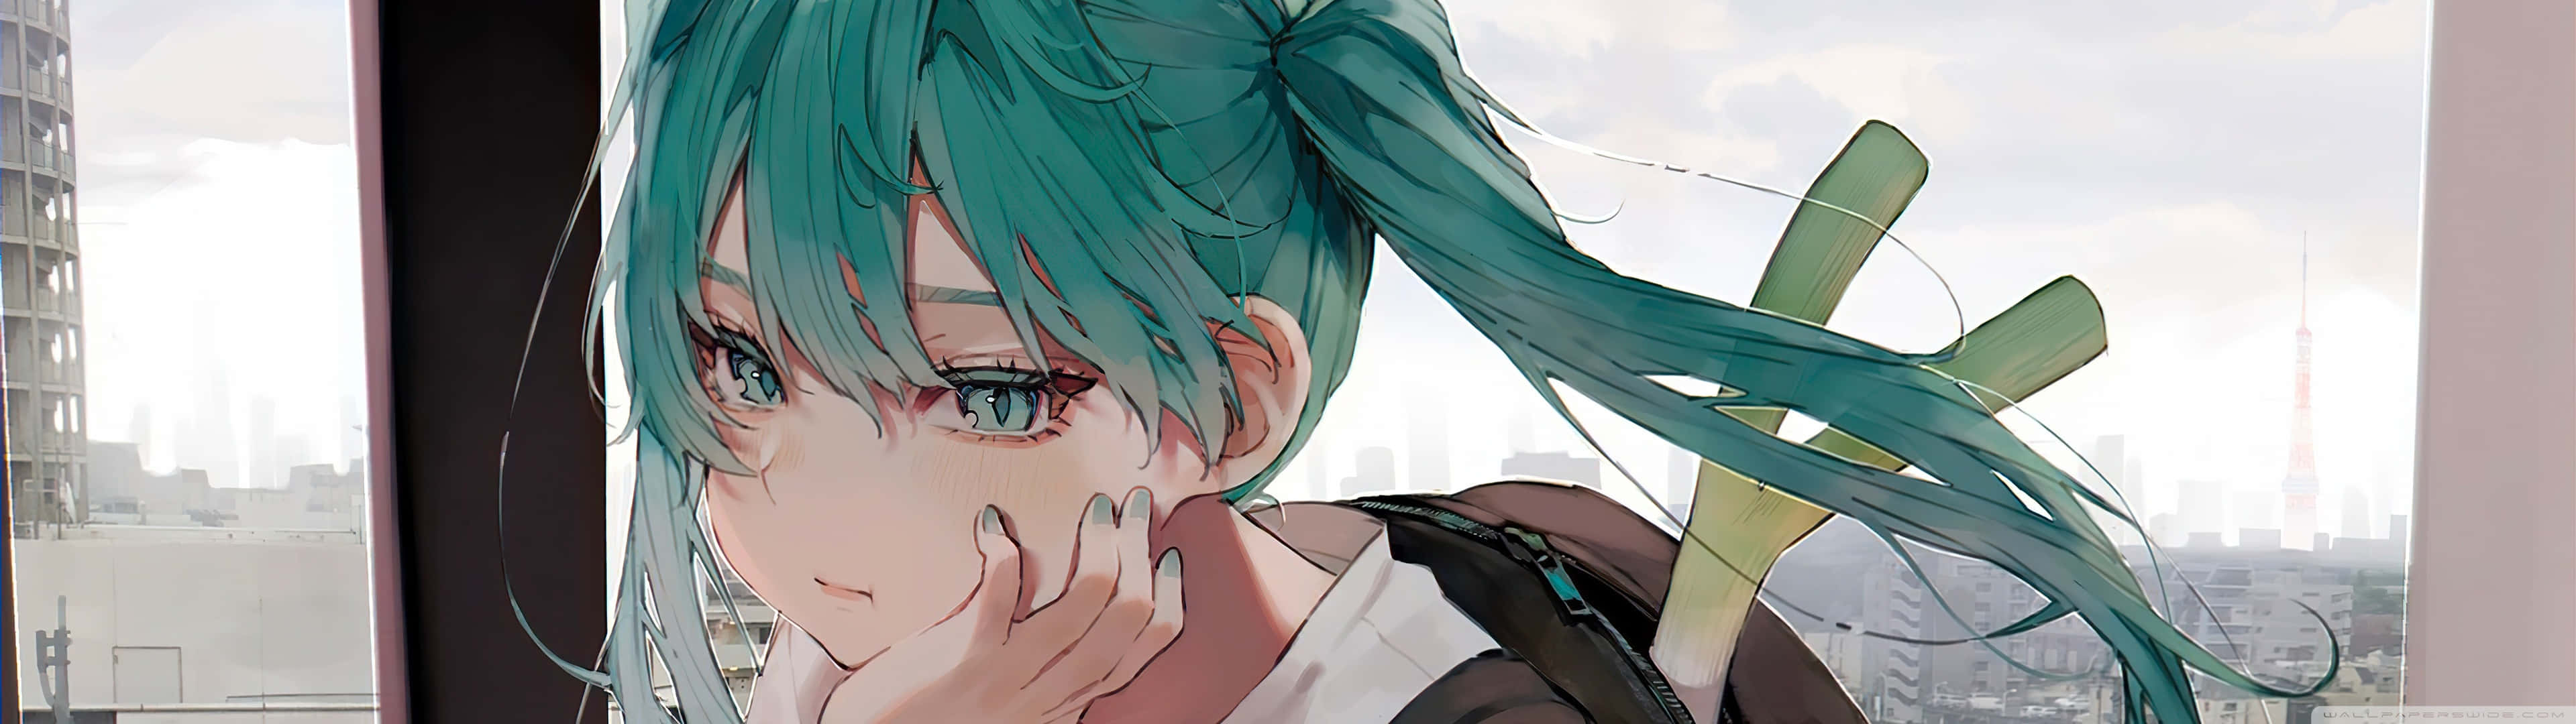 3840x1080 Anime Green Hair Hands On Face Picture